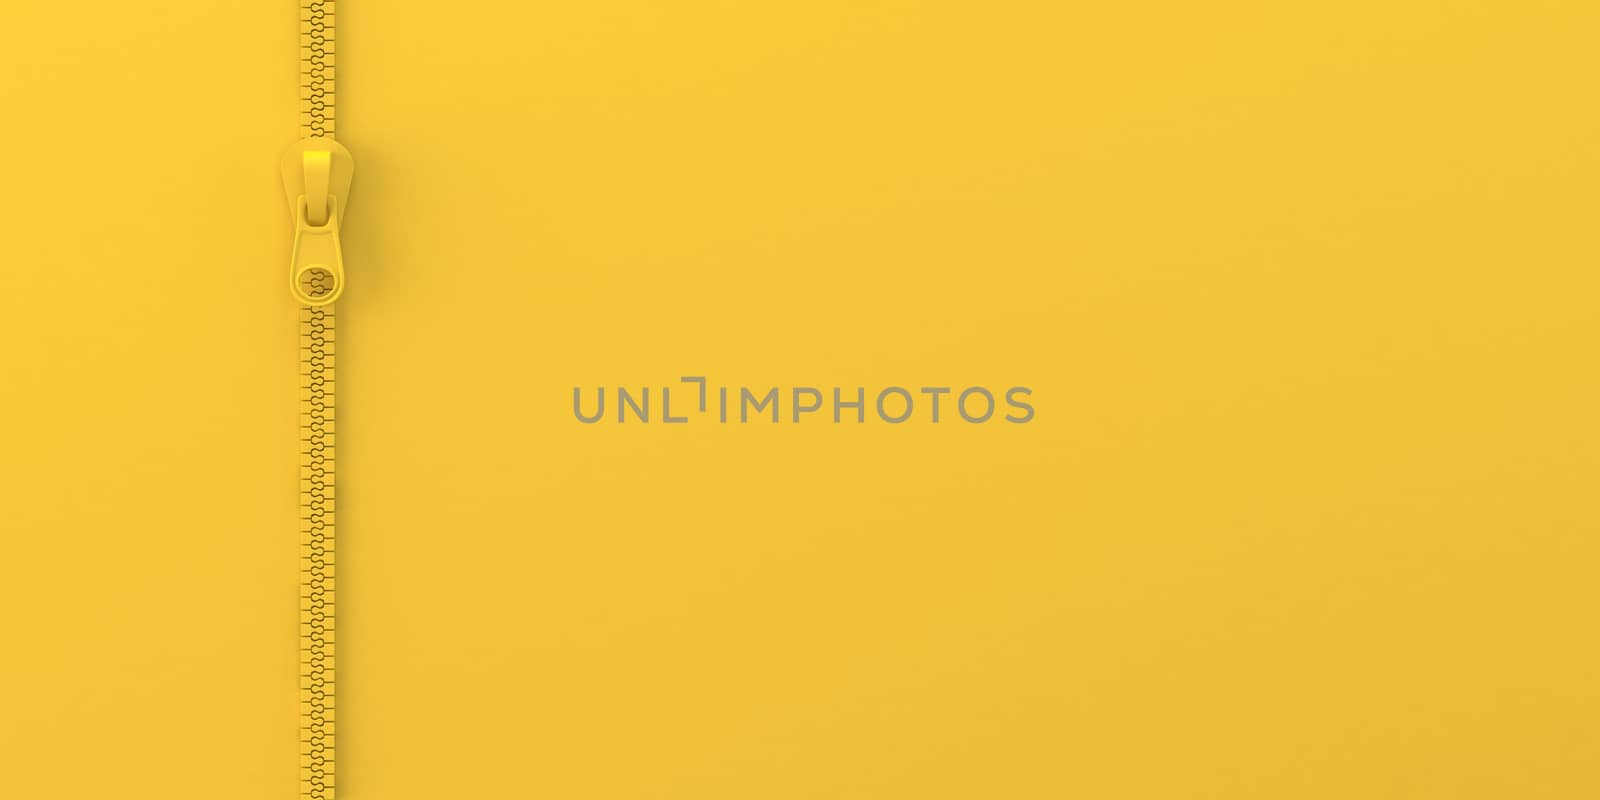 Yellow vertical zipper 3D render illustration isolated on yellow background